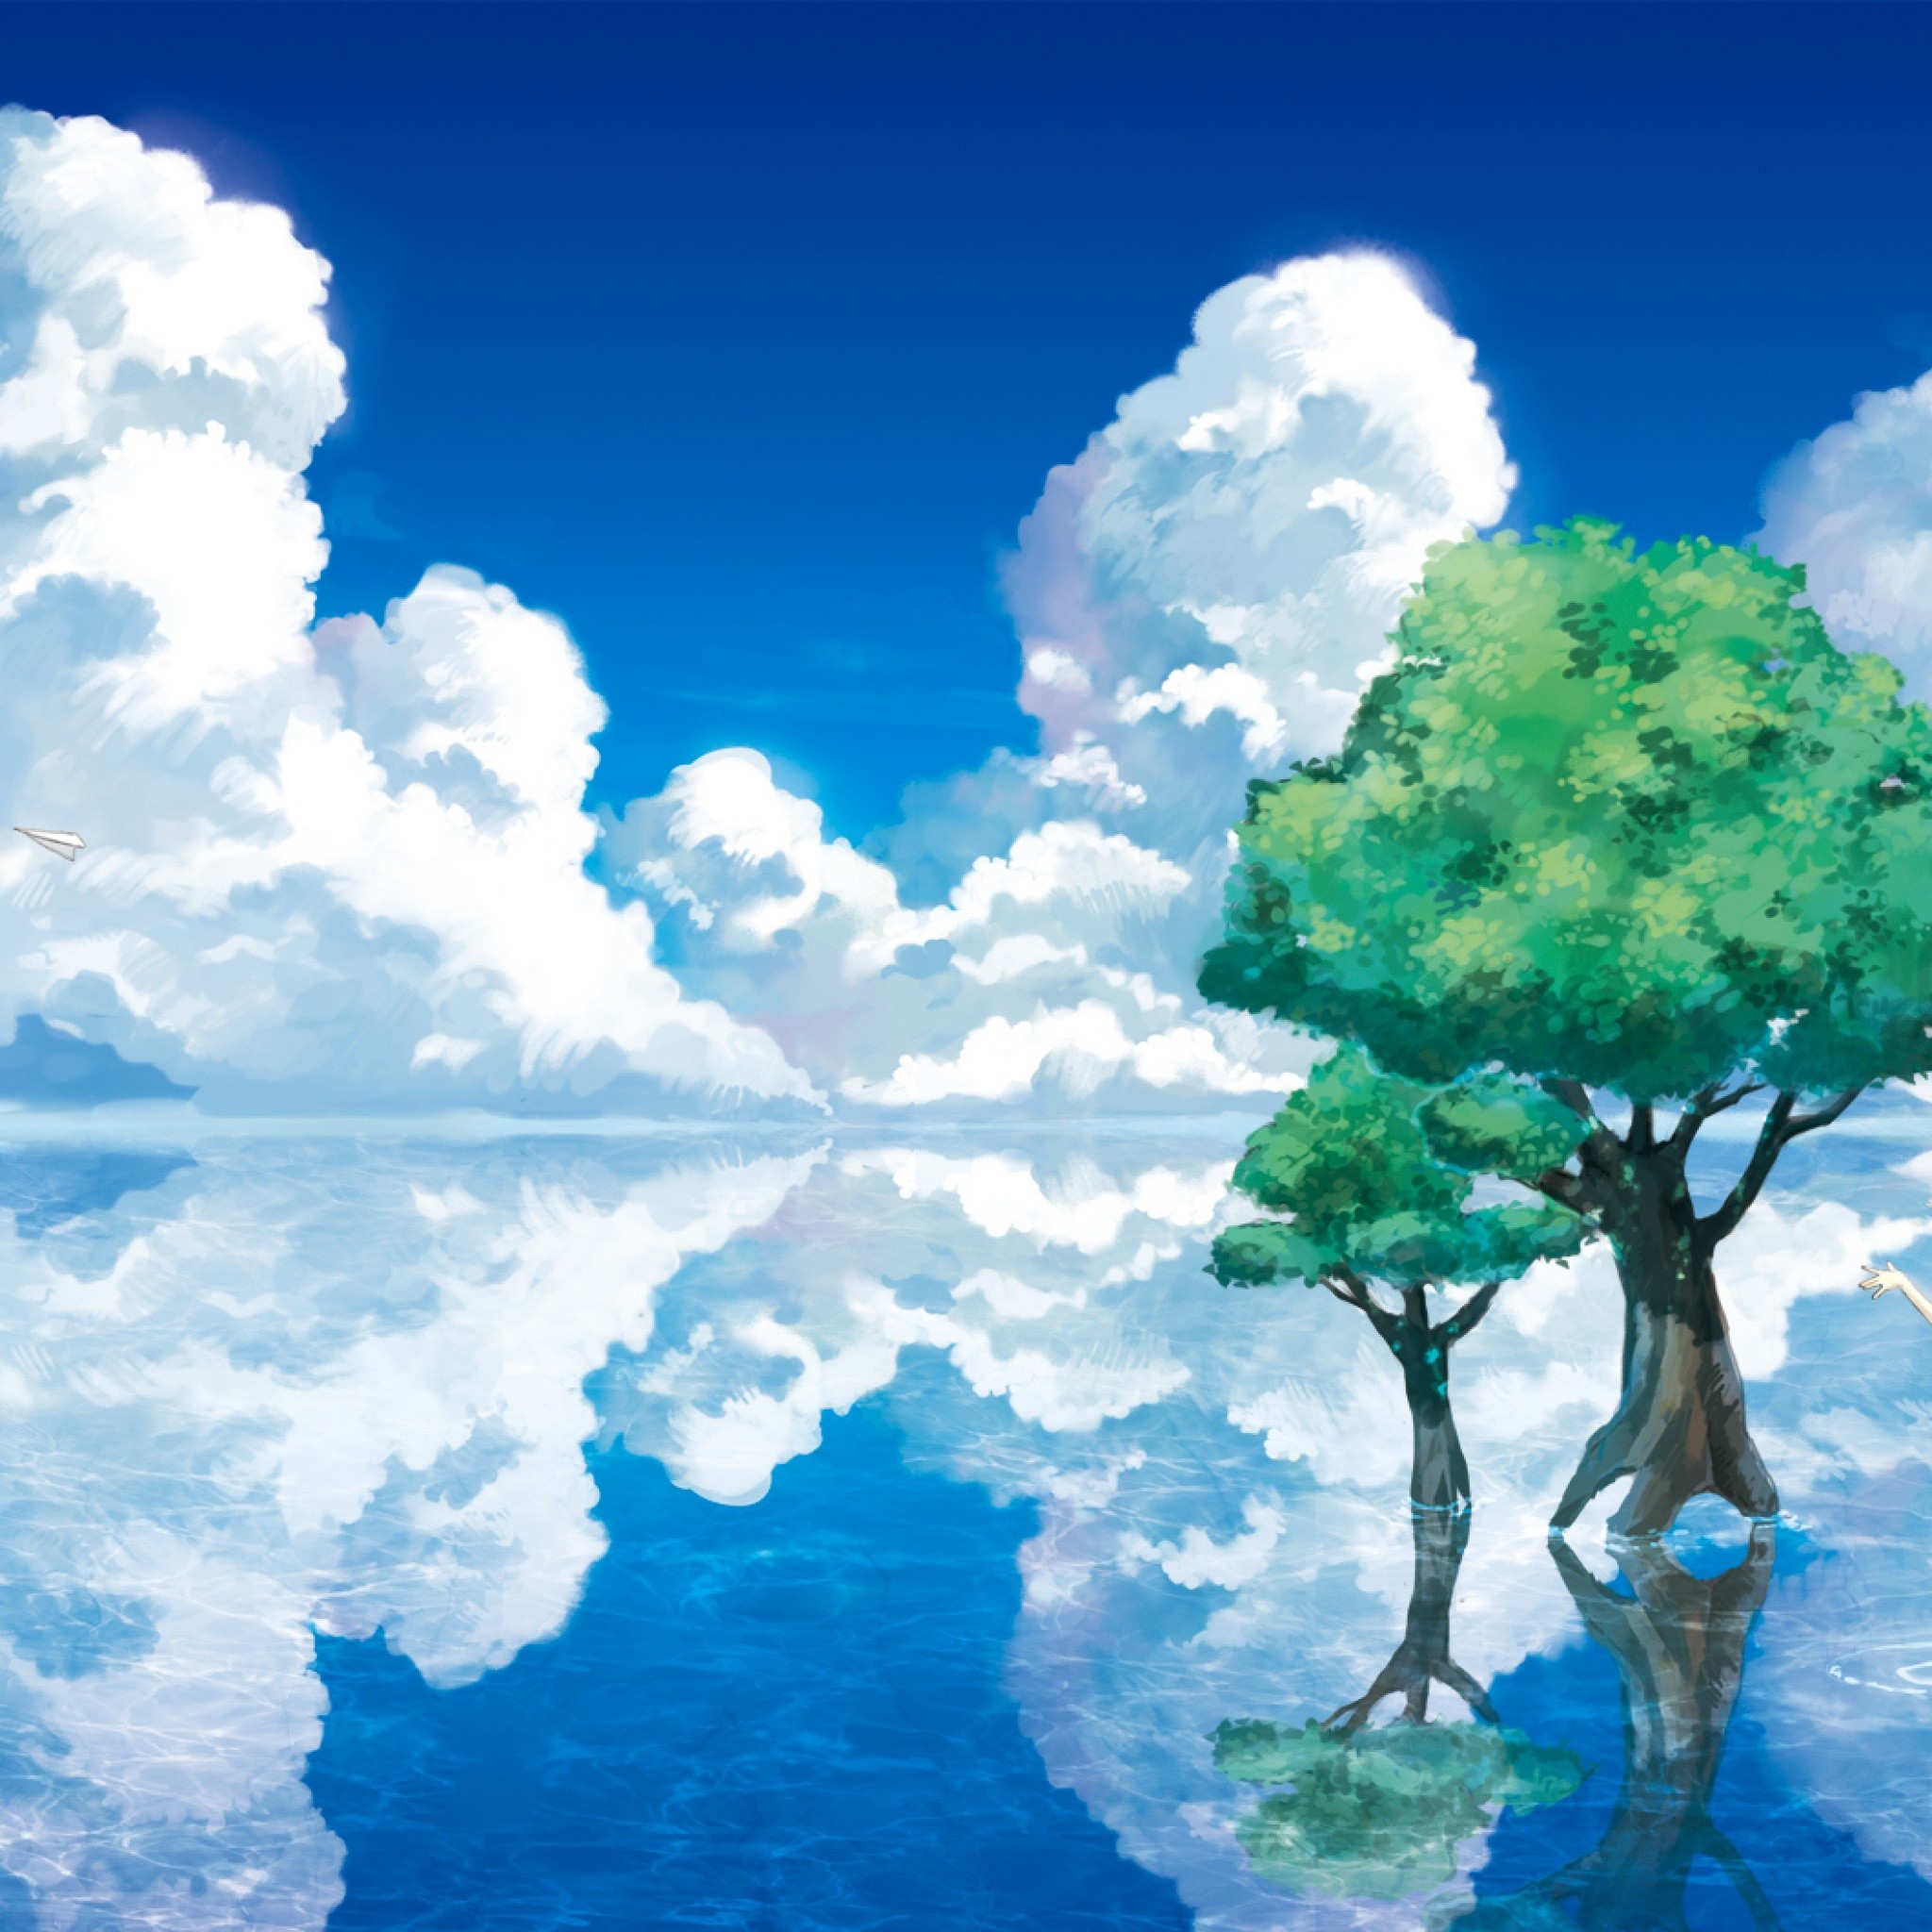 anime wallpaper for ipad,natural landscape,sky,nature,cloud,water resources